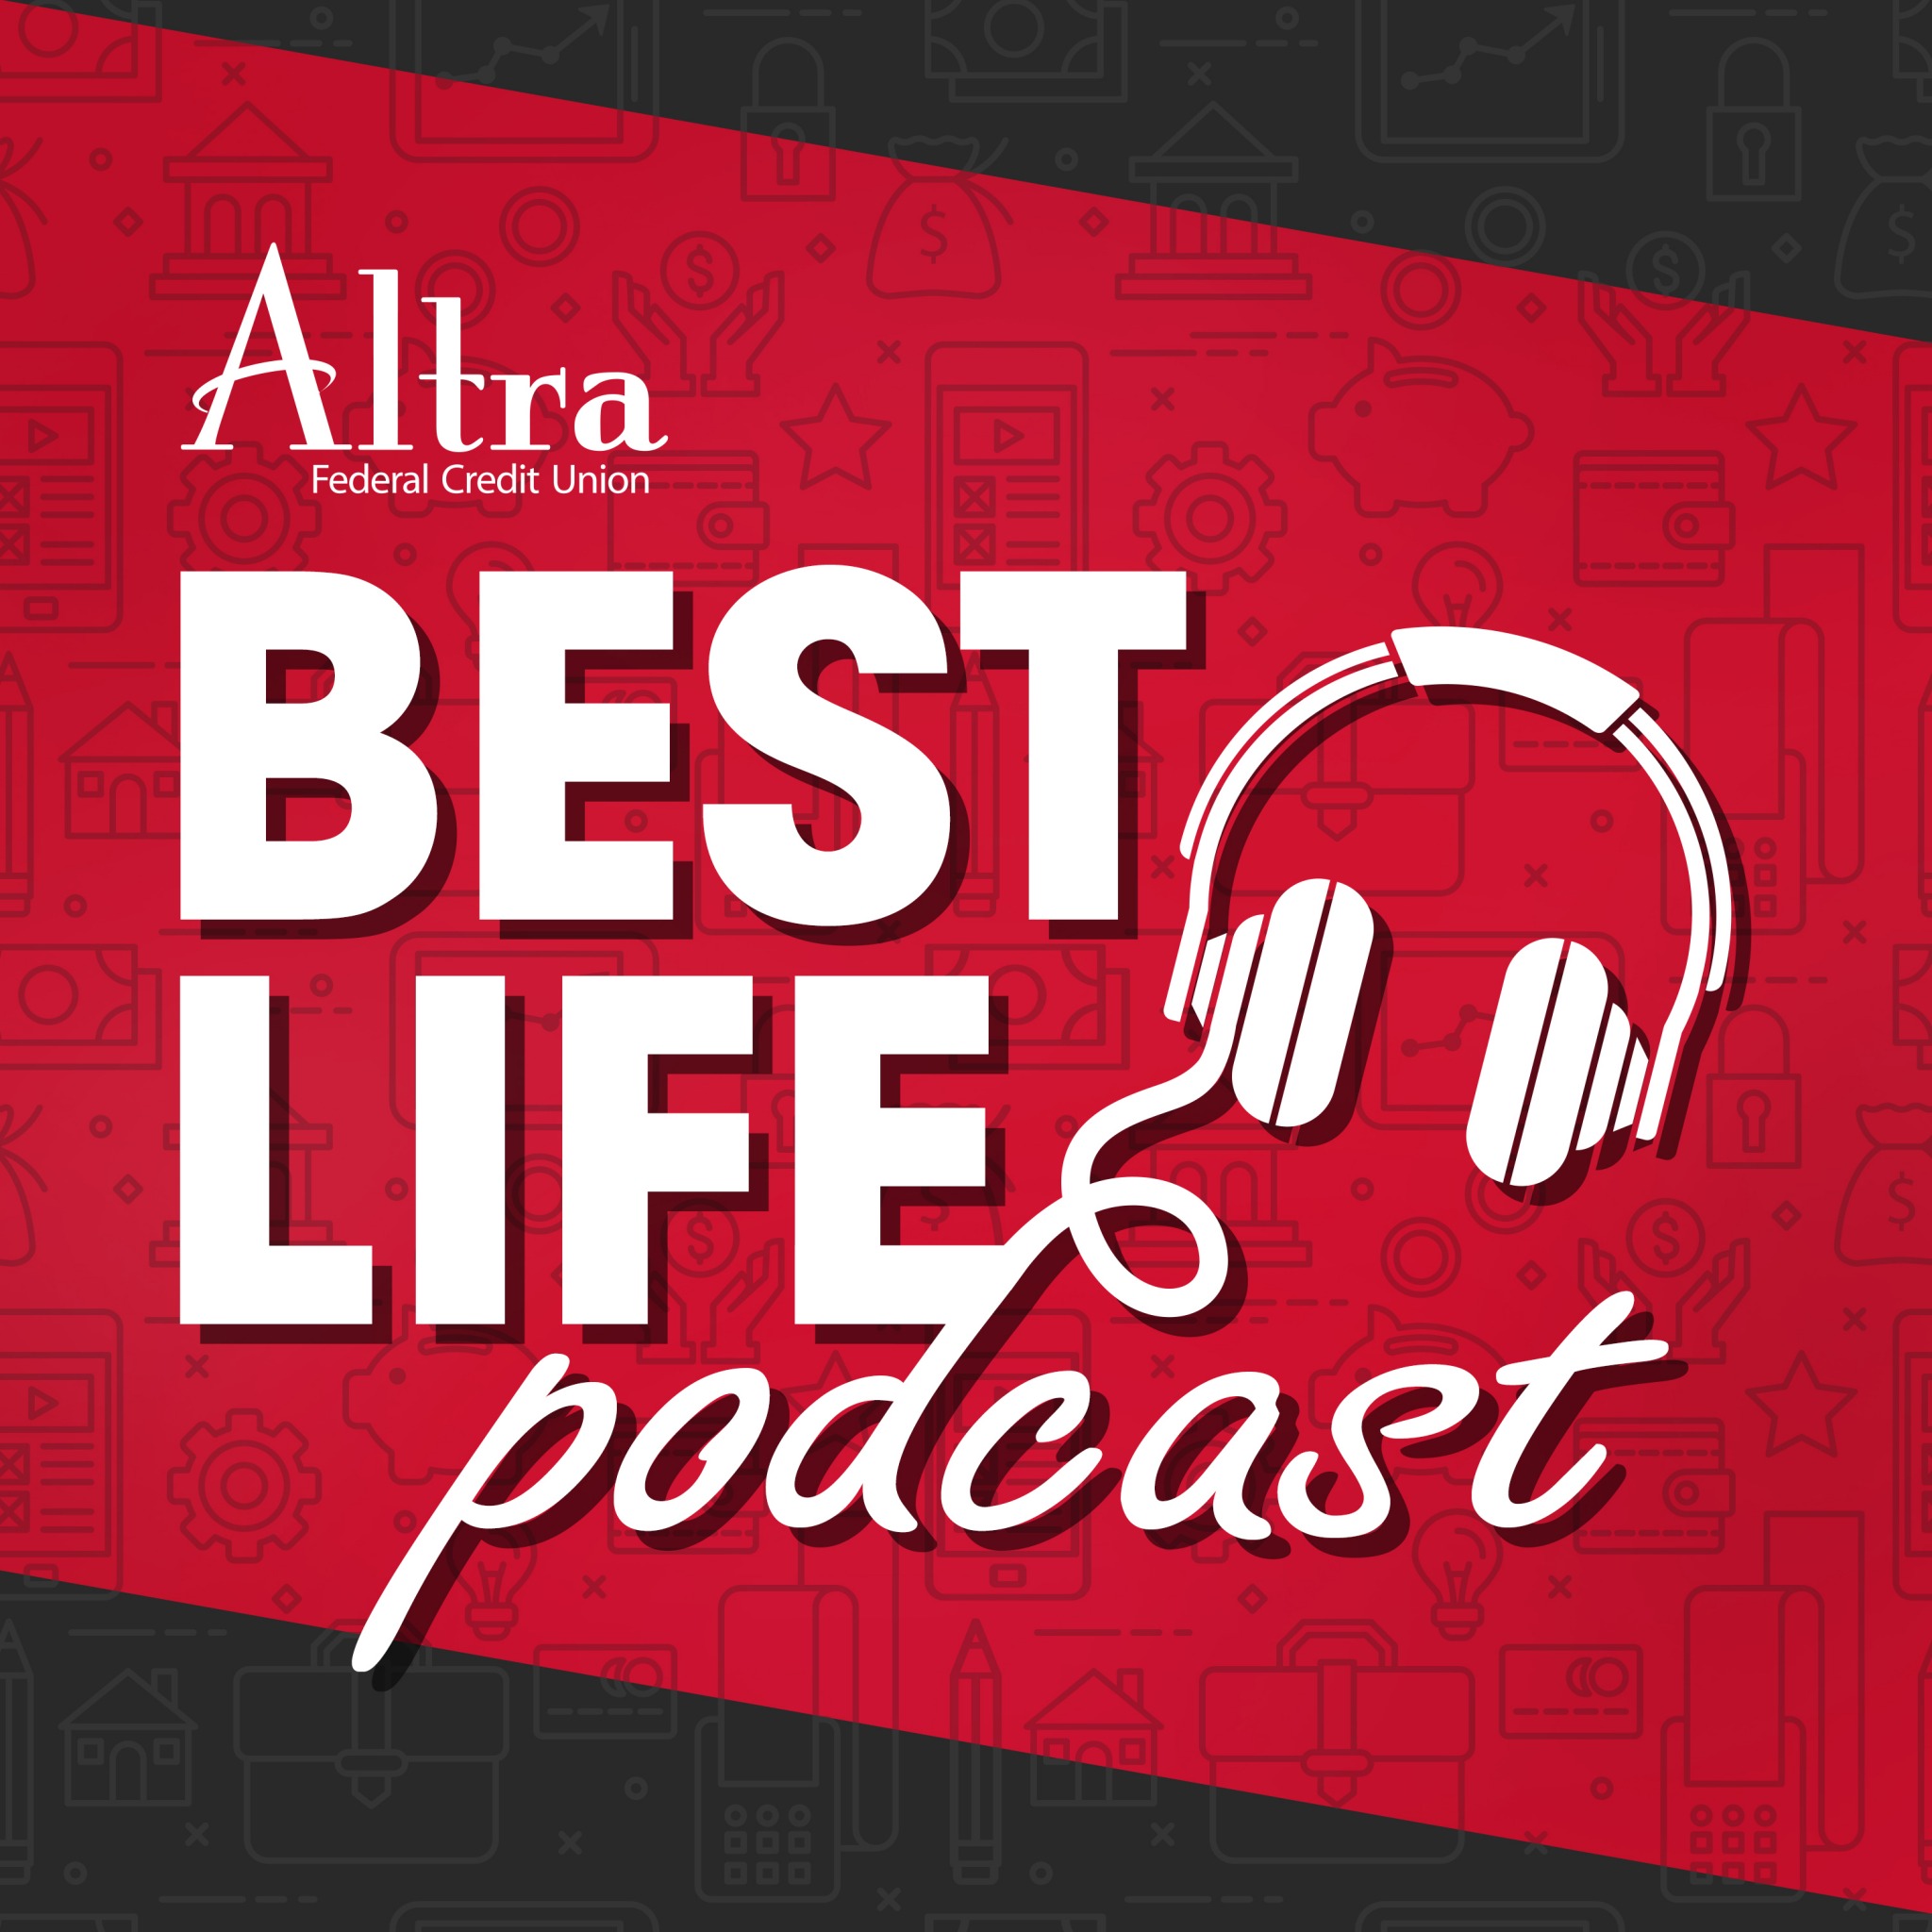 Best Life Podcast | Altra Federal Credit Union